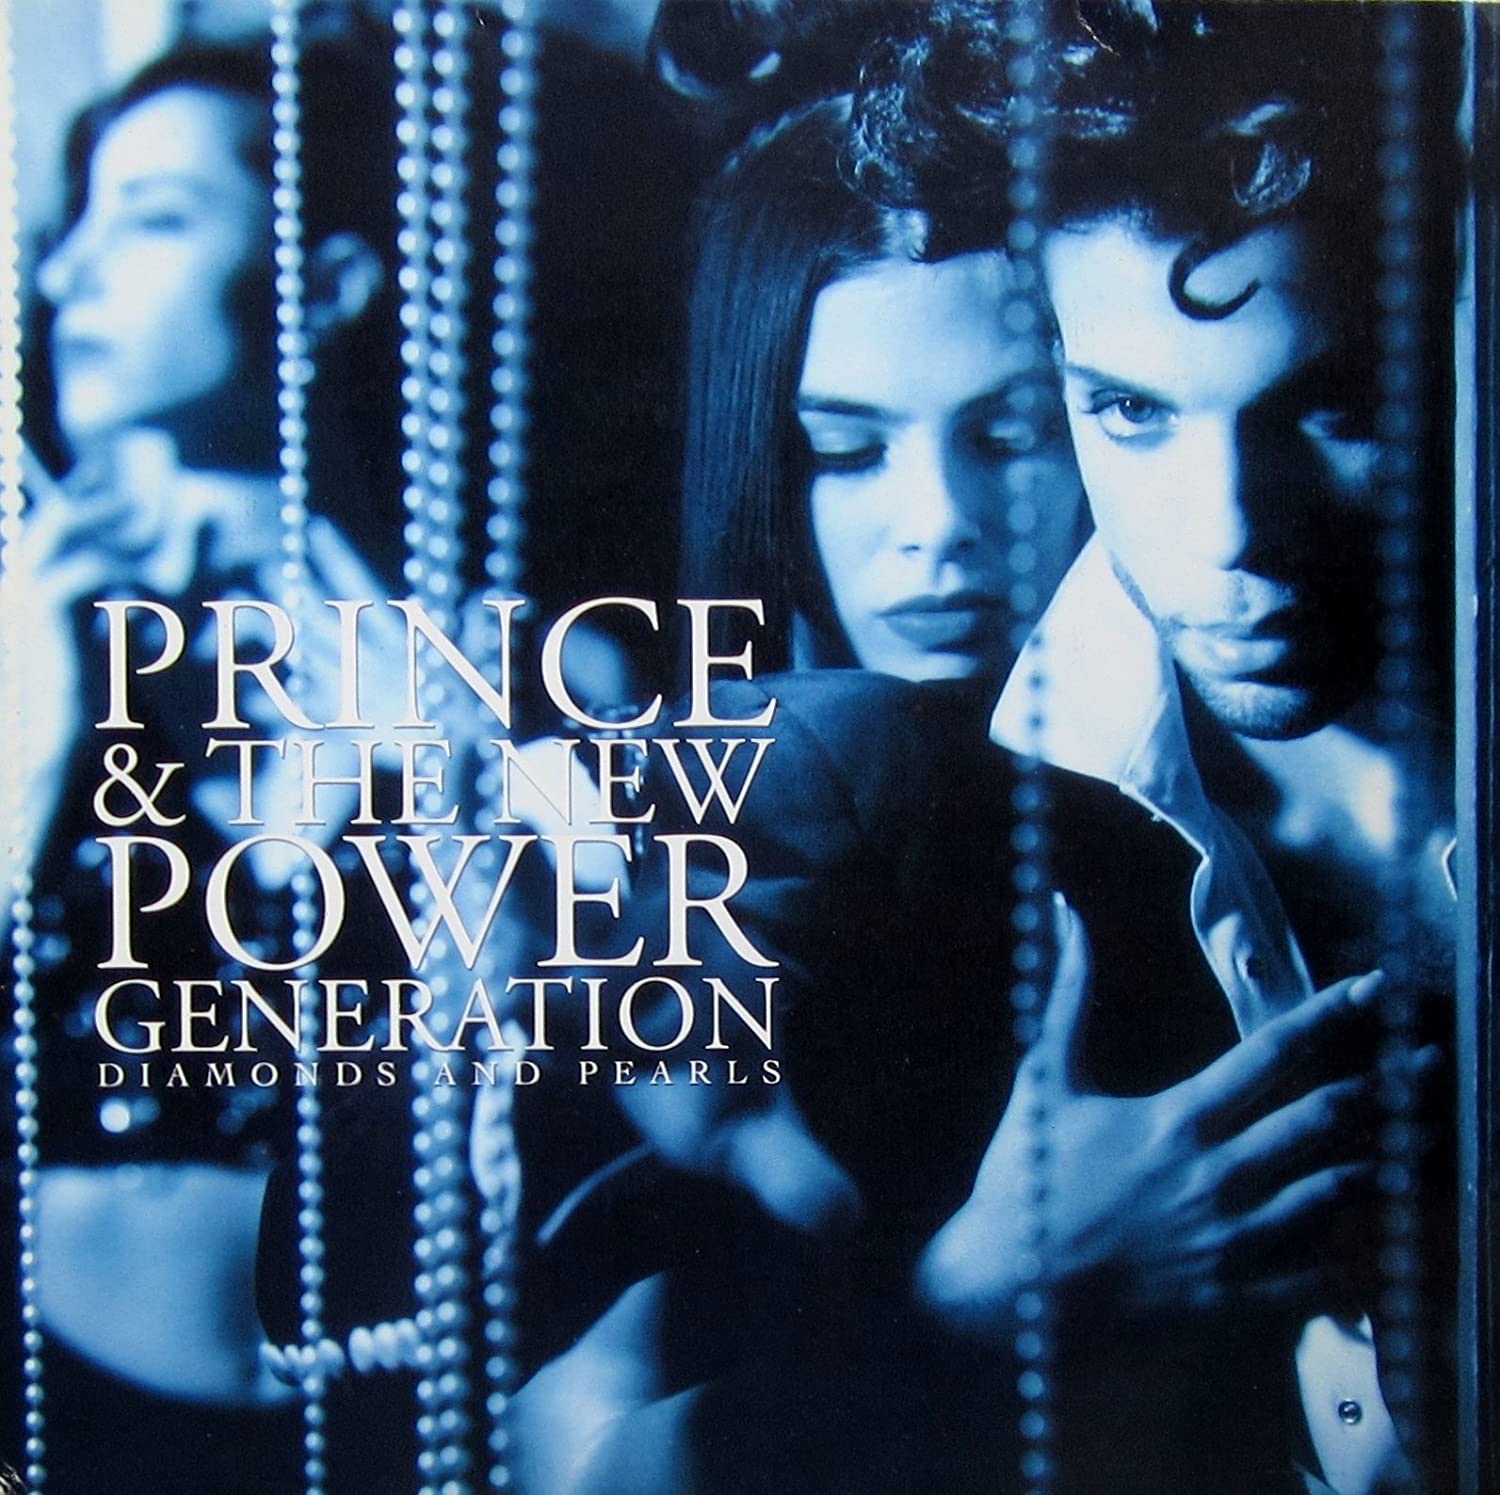 Diamonds and Pearls by Prince - CULTURE CLASSICS